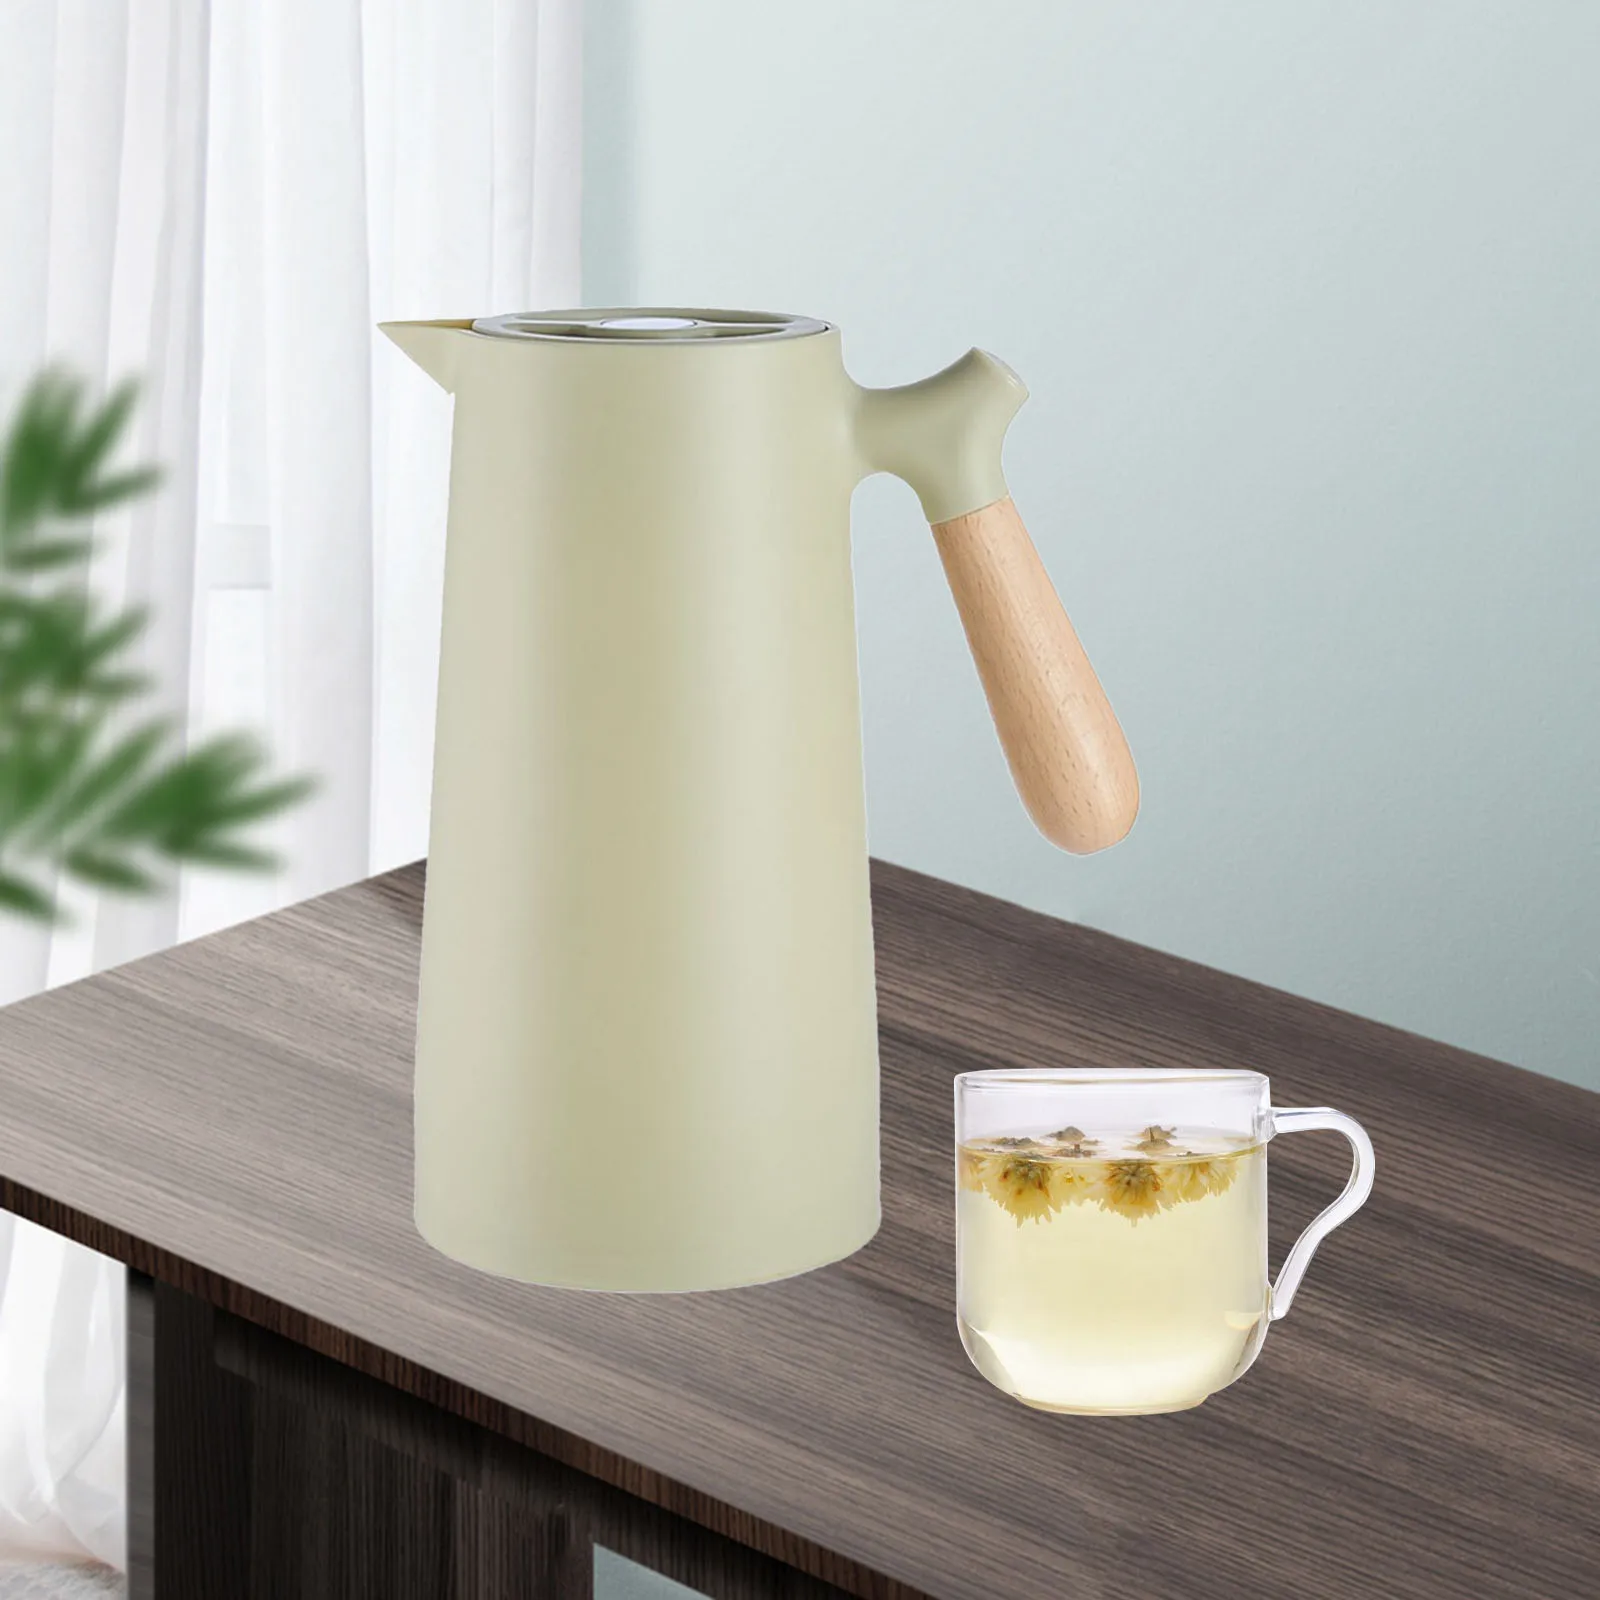 Vacuum Flasks Insulation 1L Hot Water Pot Office Coffee Thermal Warmer Bottles 24 Hour Heat Retention Kettle with Wooden Handle